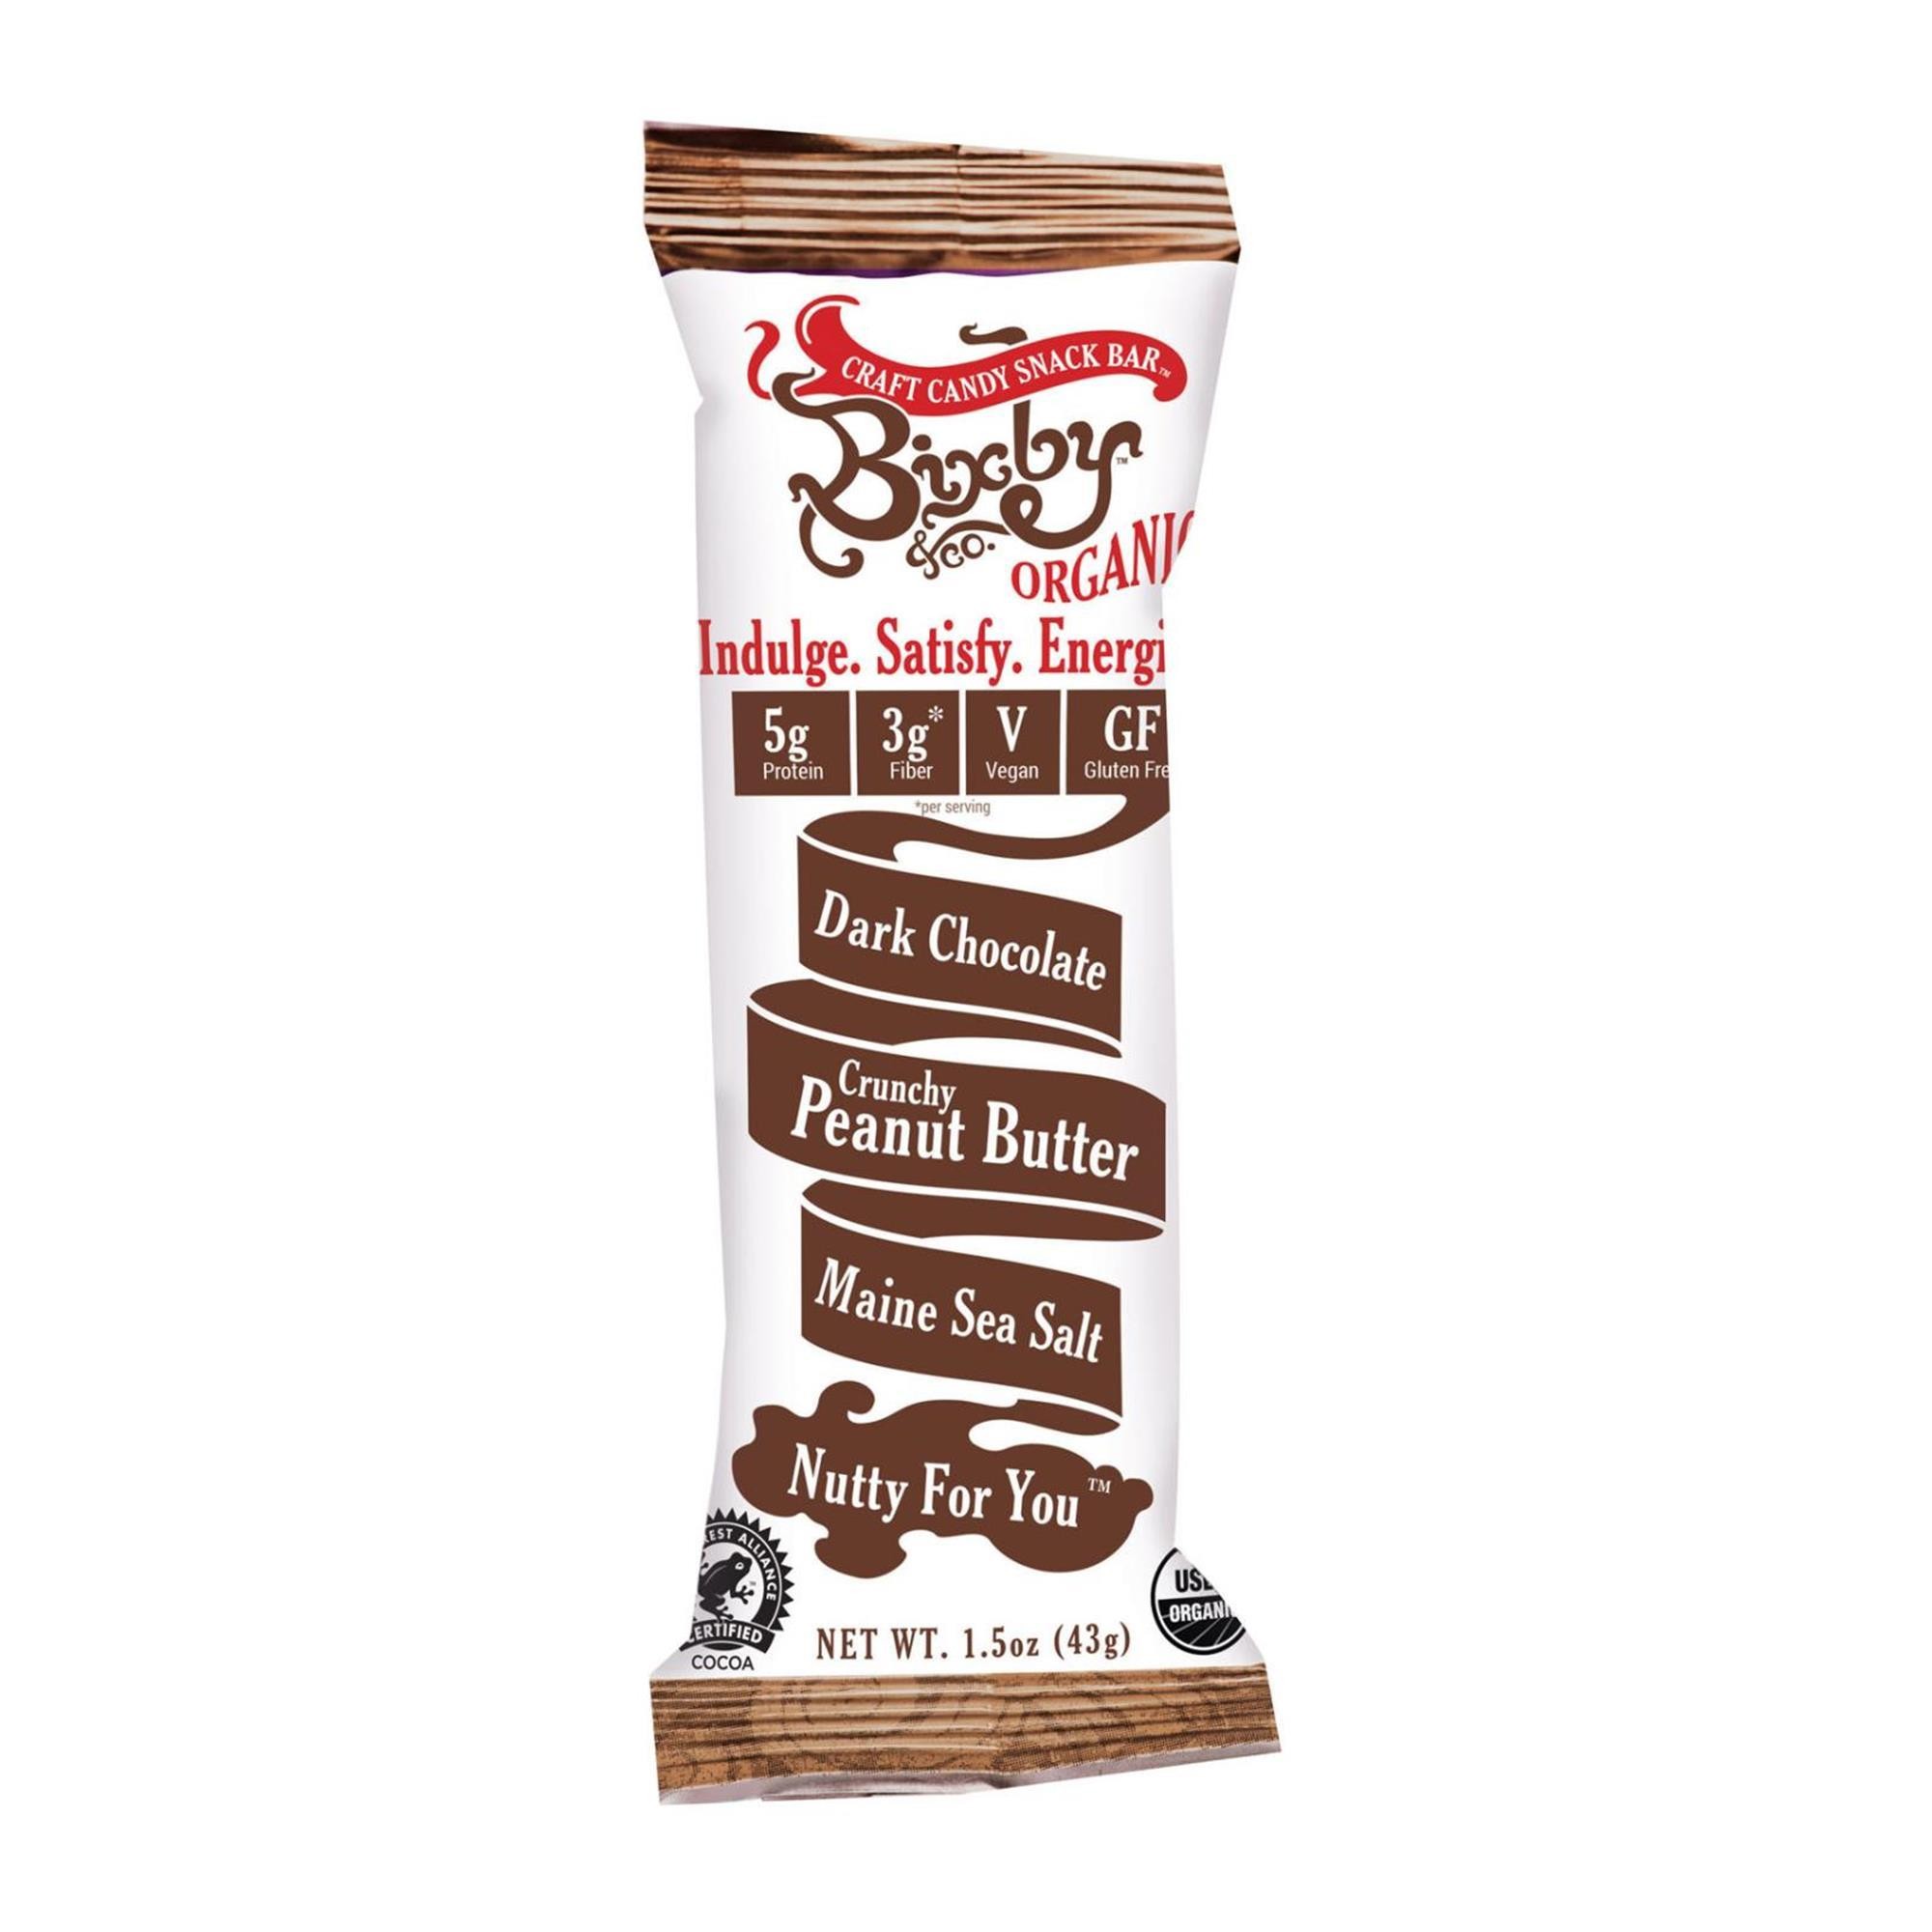 Bixby Nutty for You Snack Bar